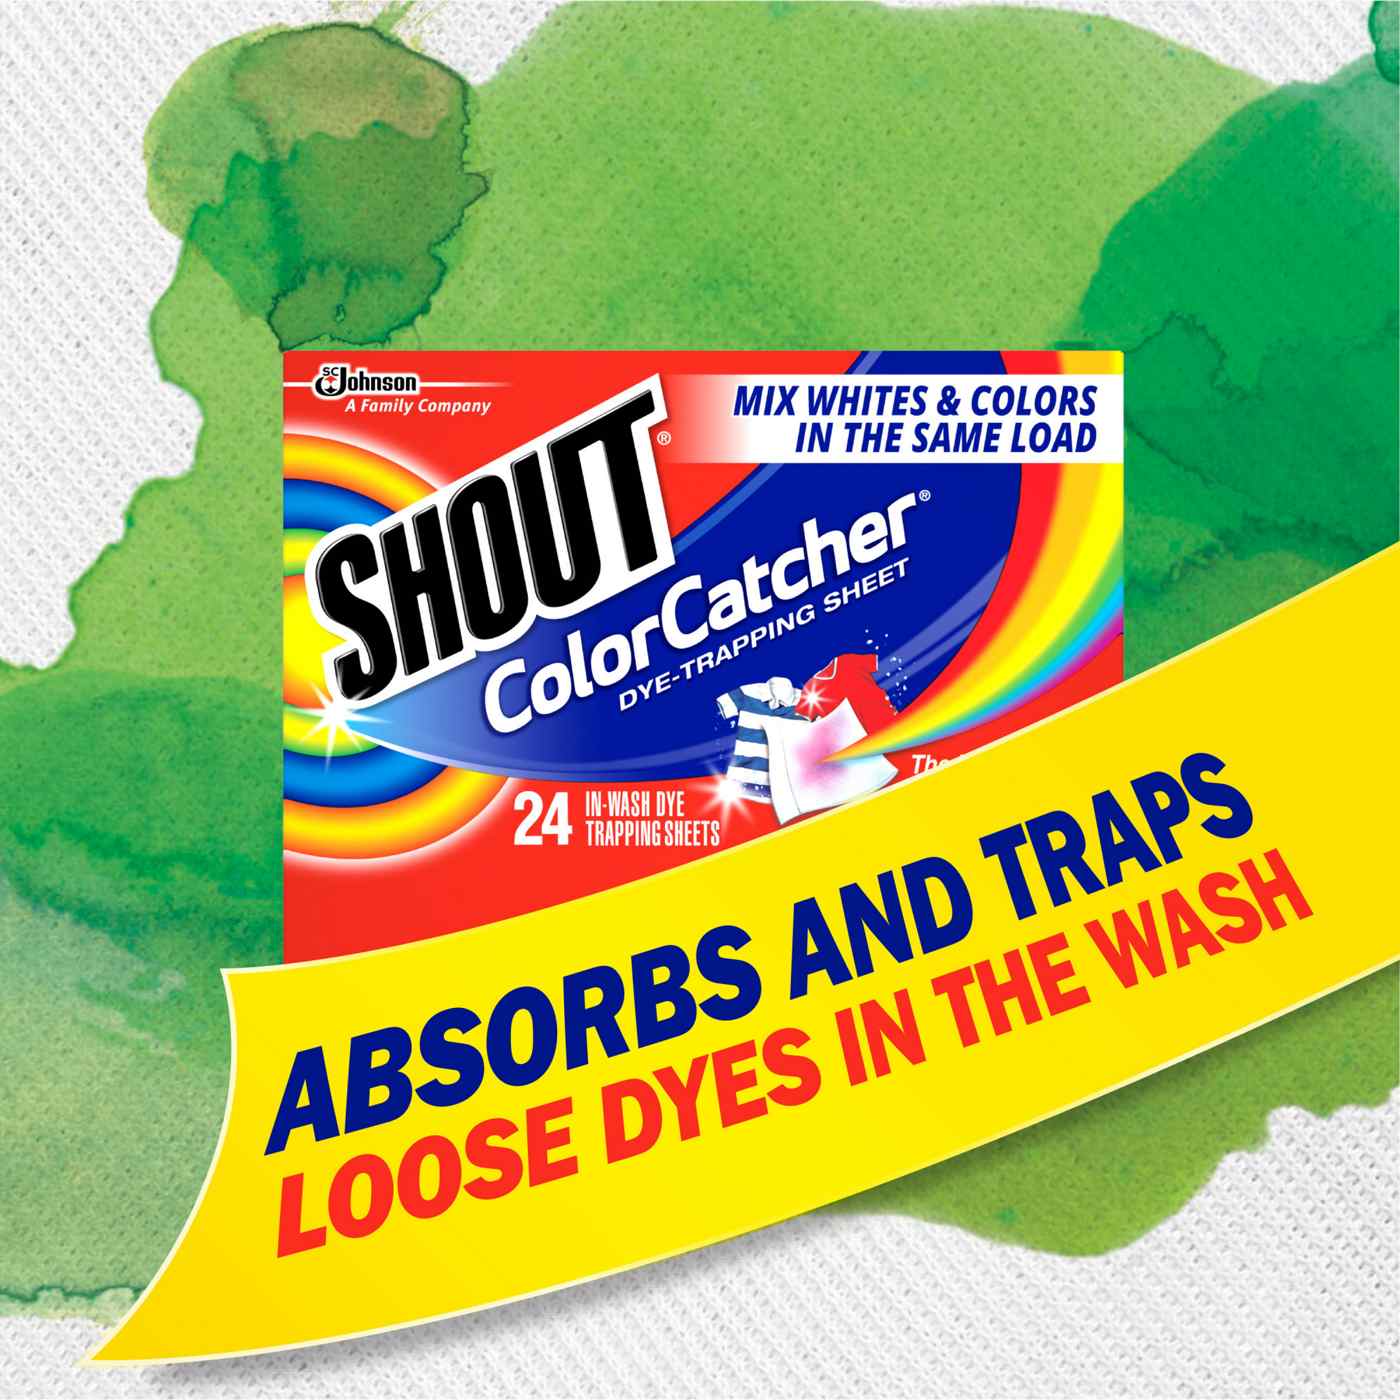 Shout Color Catcher Dye-Trapping Sheets; image 6 of 9